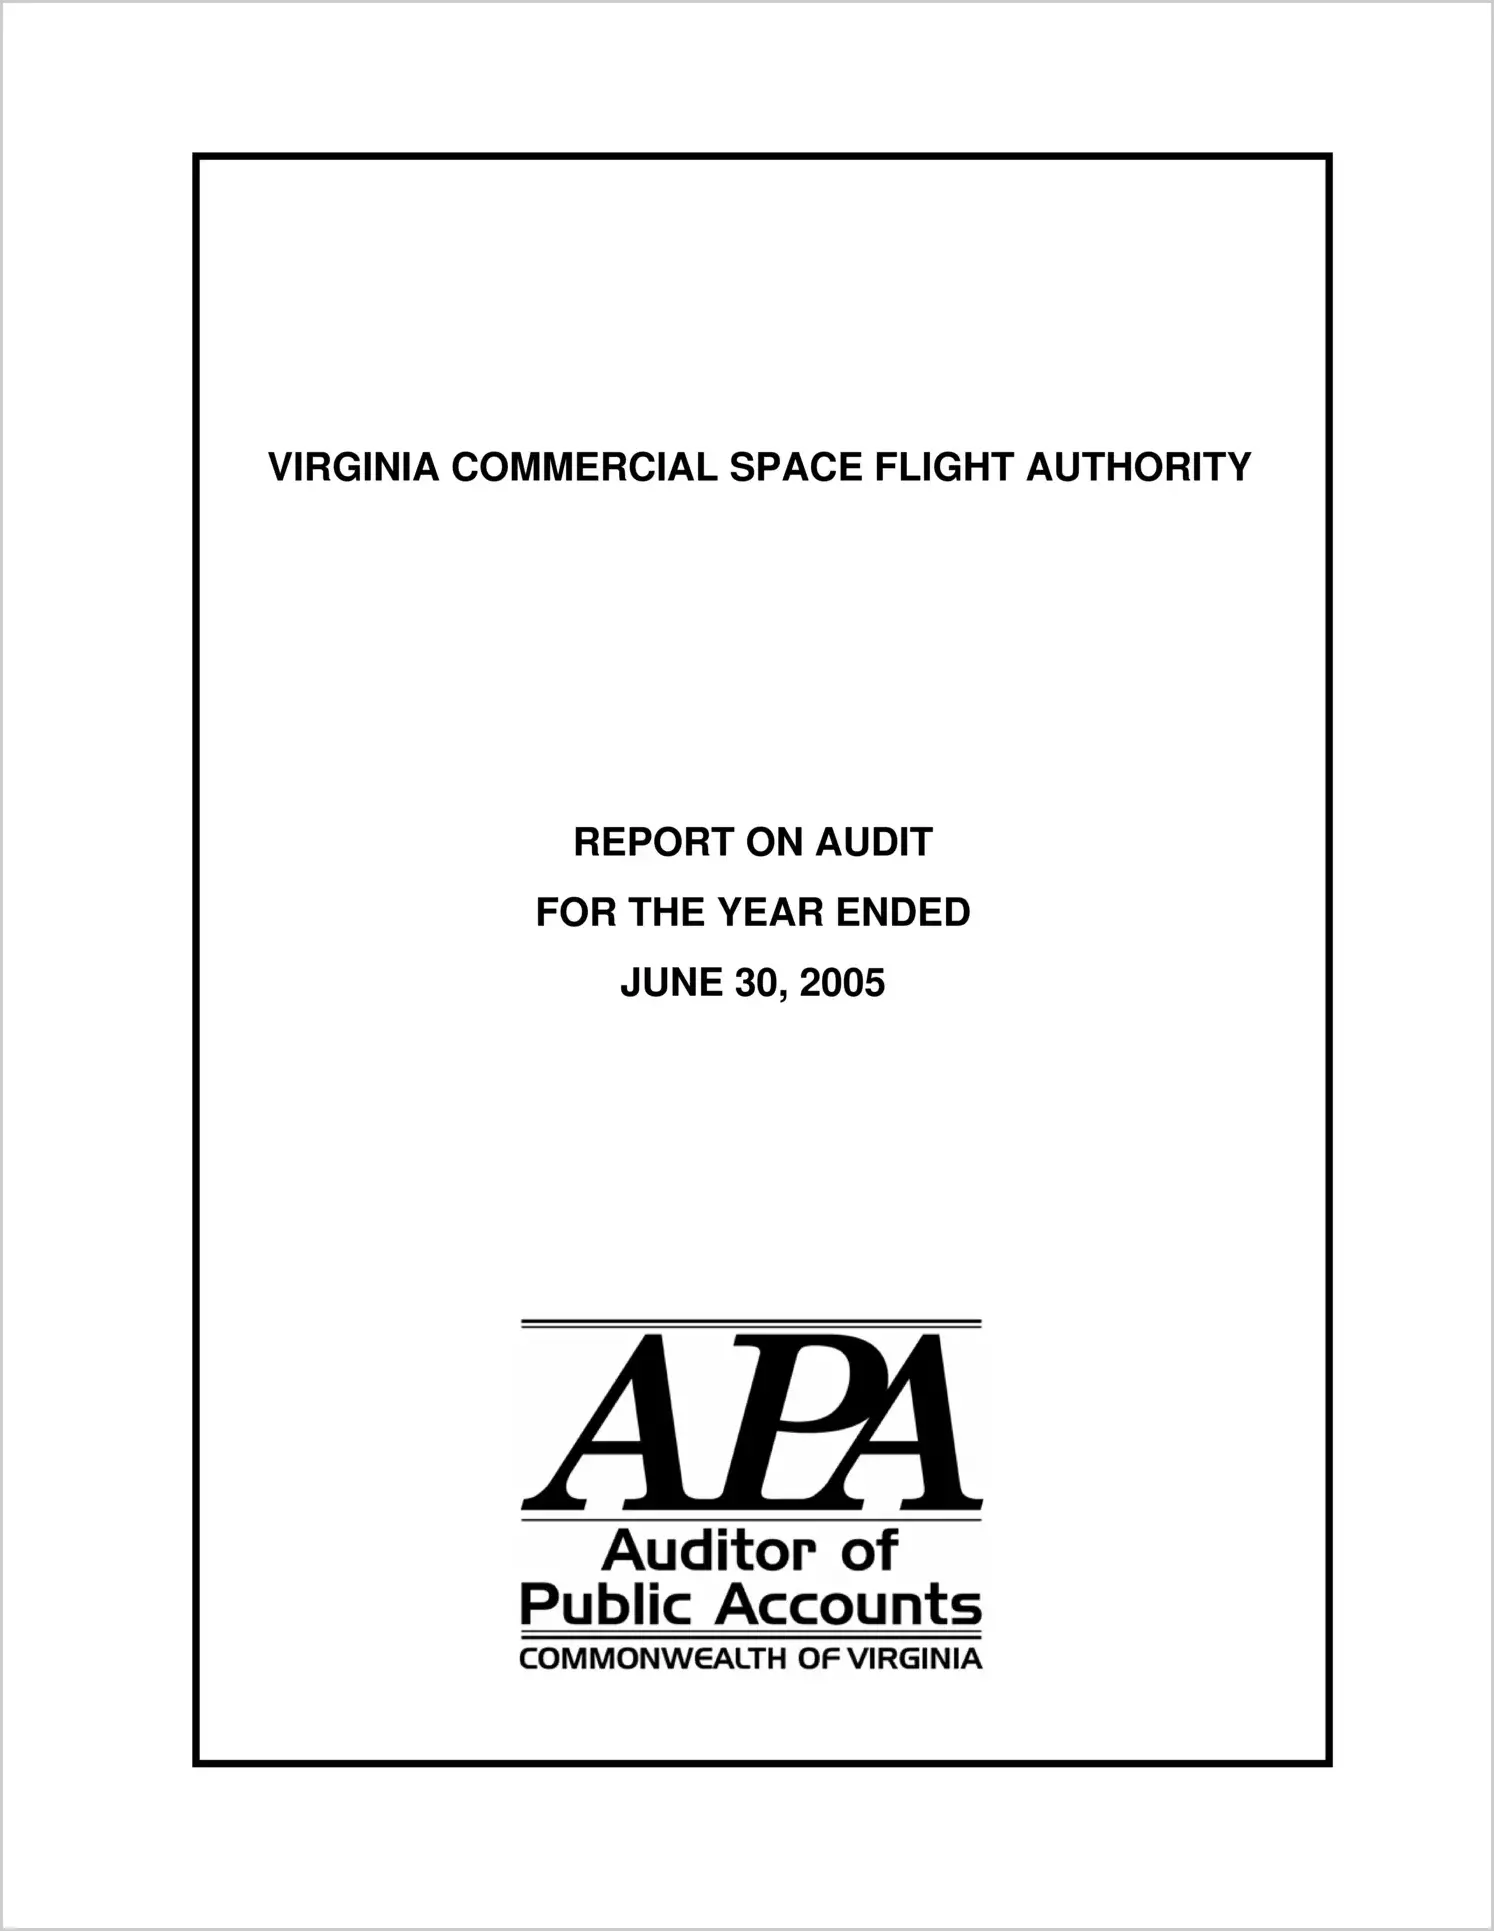 Virginia Commercial Space Flight Authority for the year ended June 30, 2005